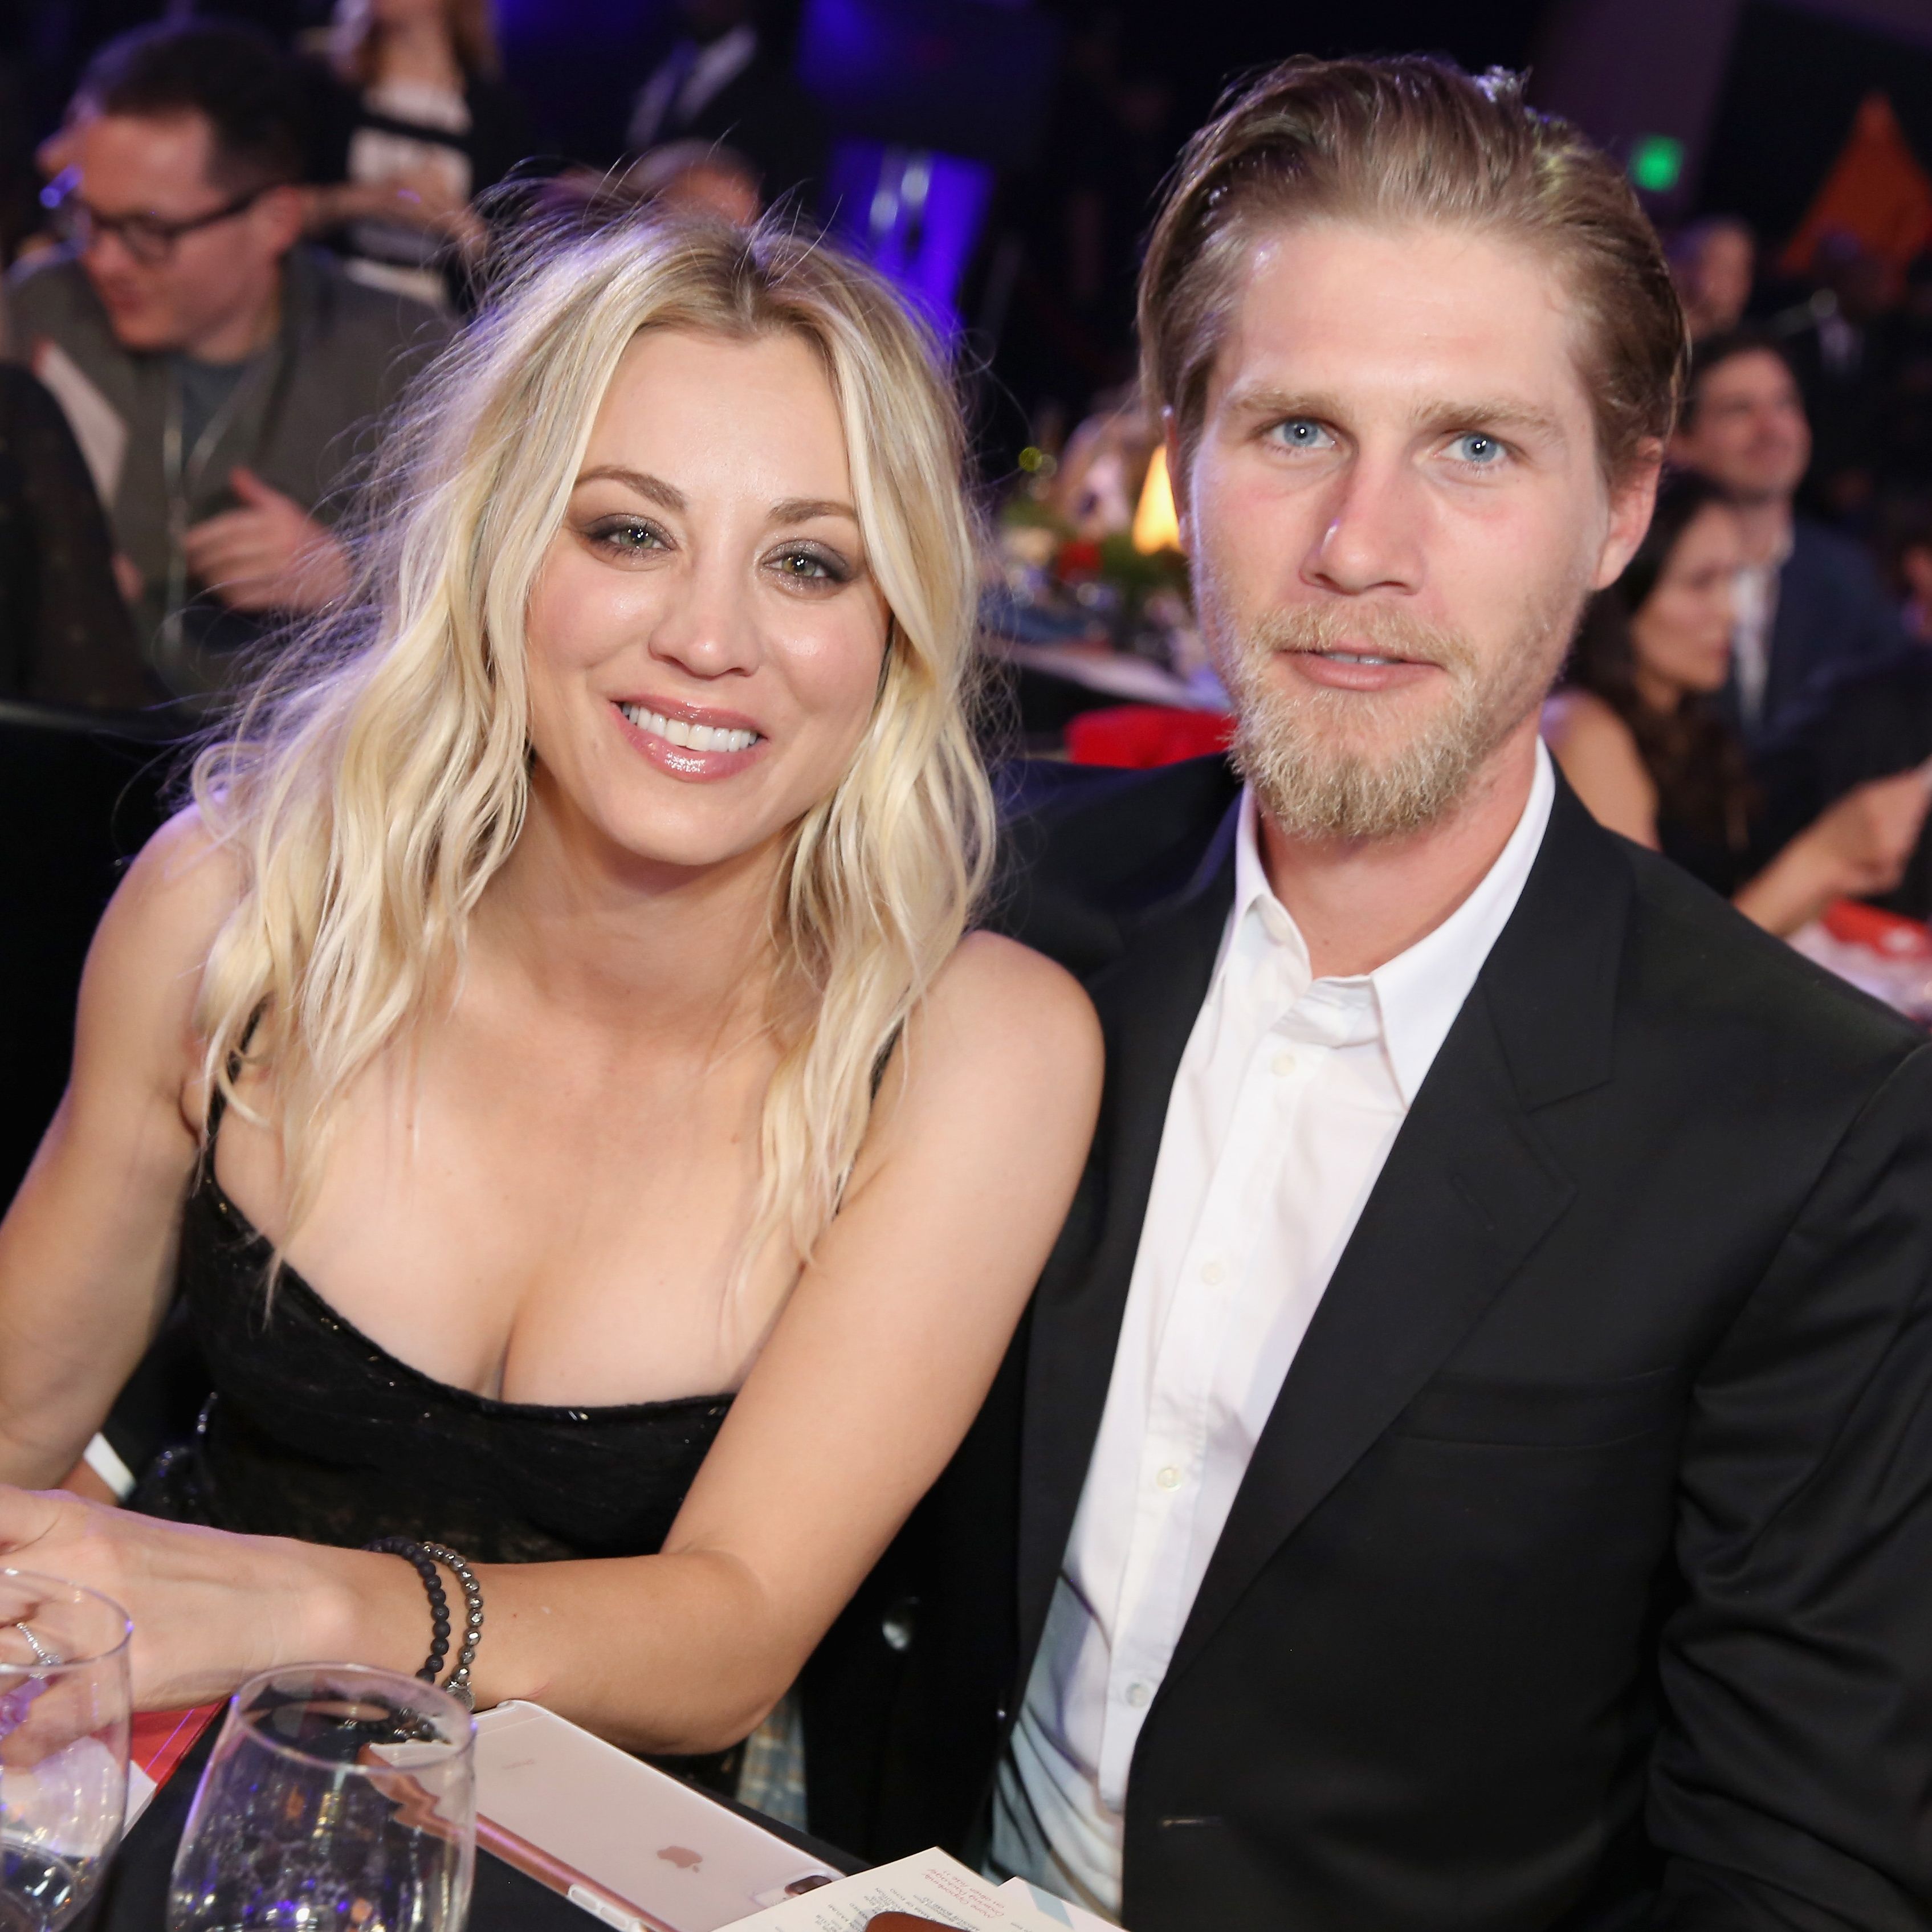 Kaley Cuoco and Karl Cook Finalize Their Divorce Less Than a Year After Announcing Split